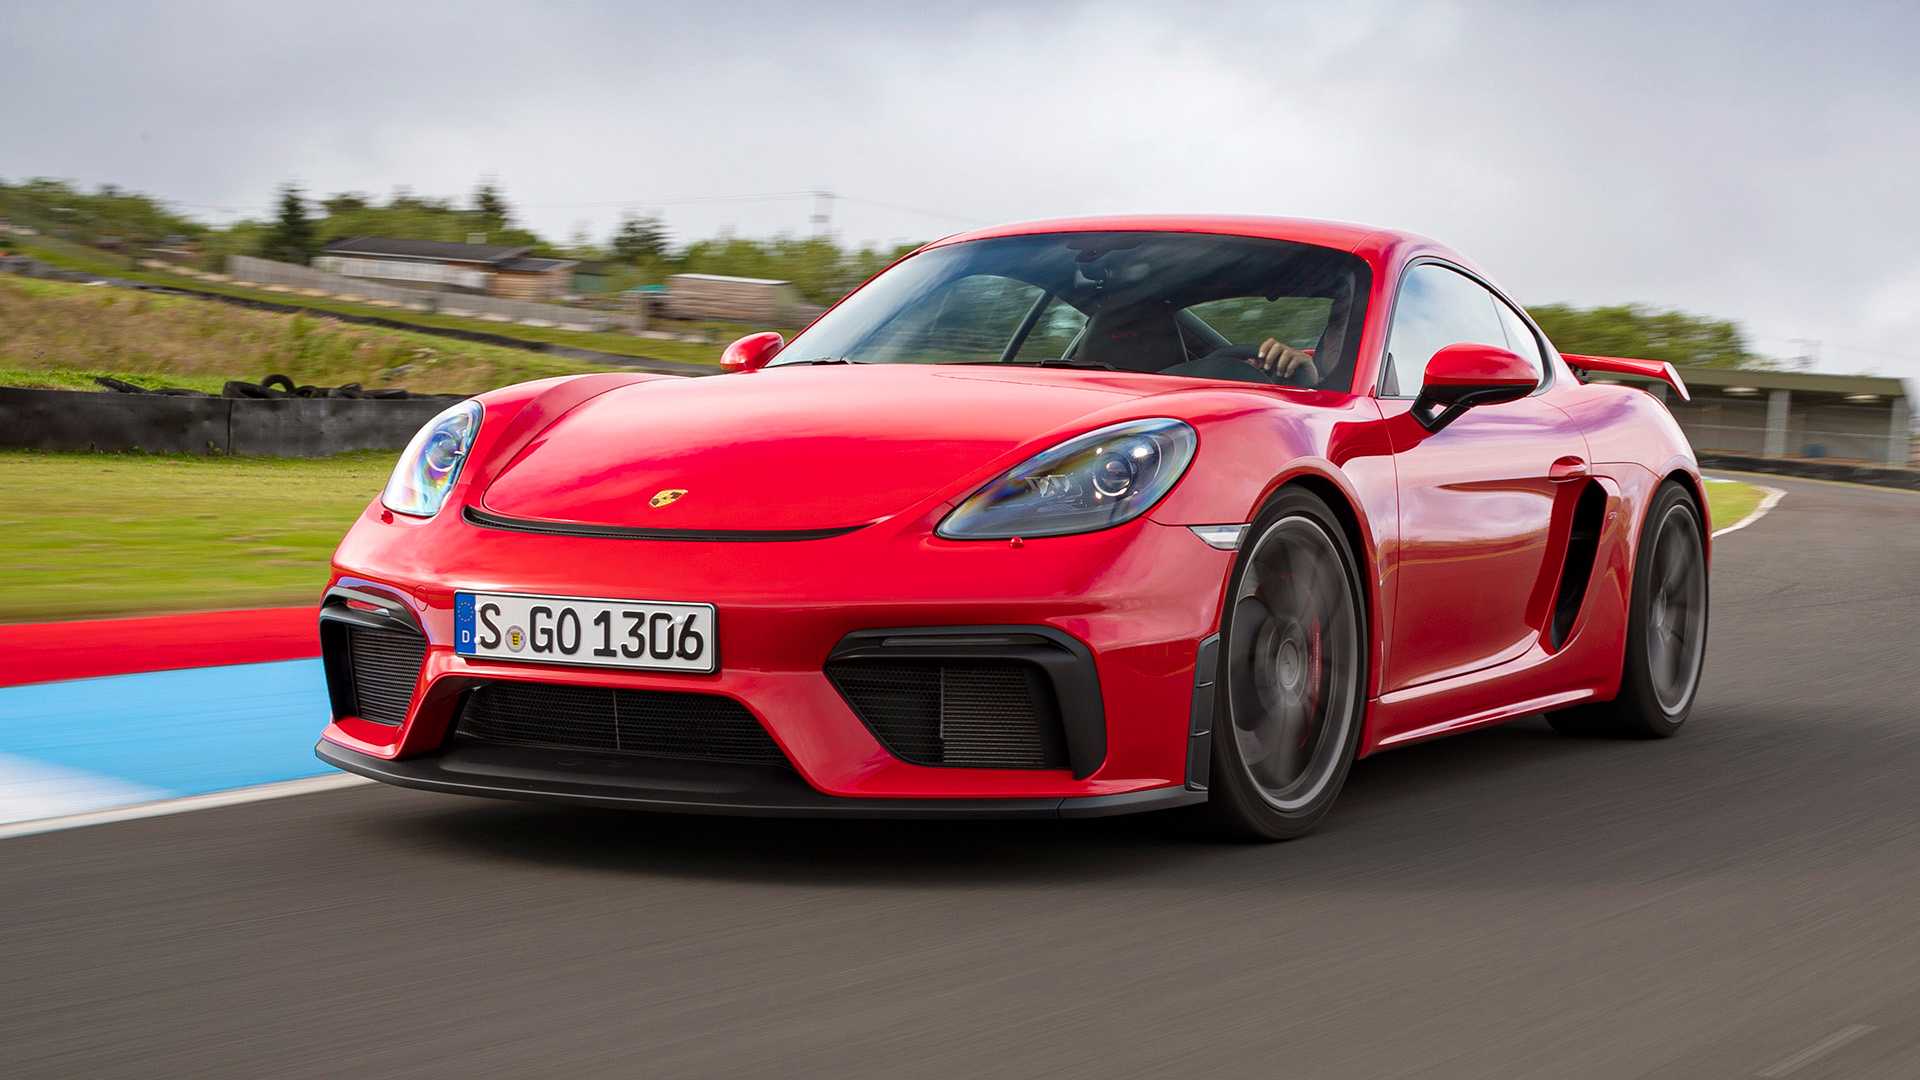 Porsche Admits The Cayman GT4's Gearbox Is Not What They Wanted